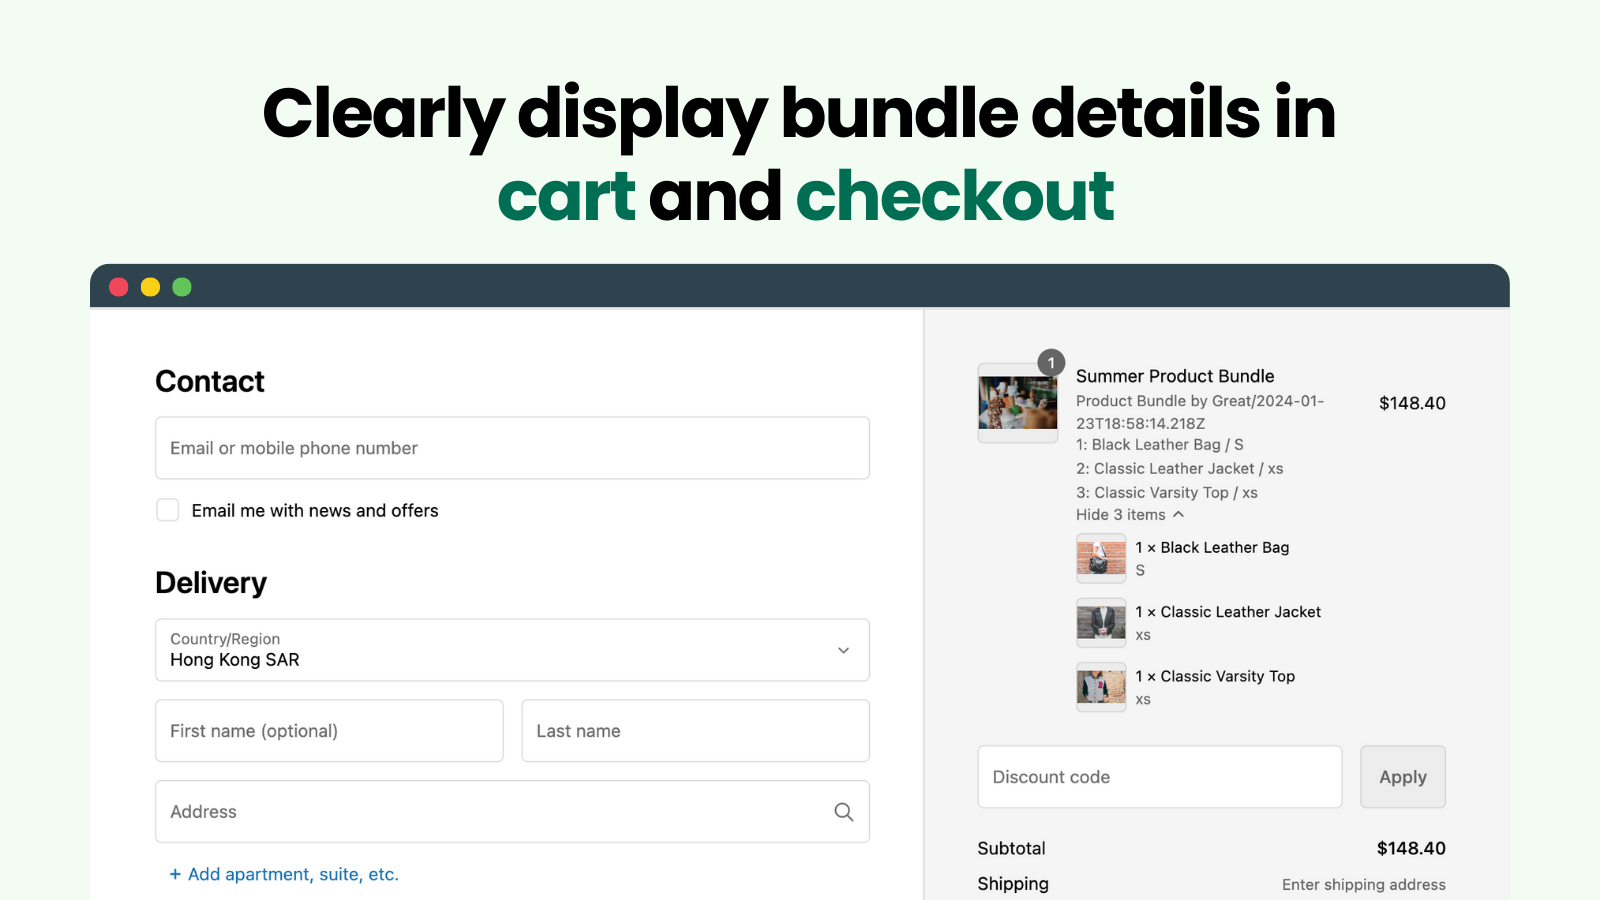 Display bundle details in cart and checkout